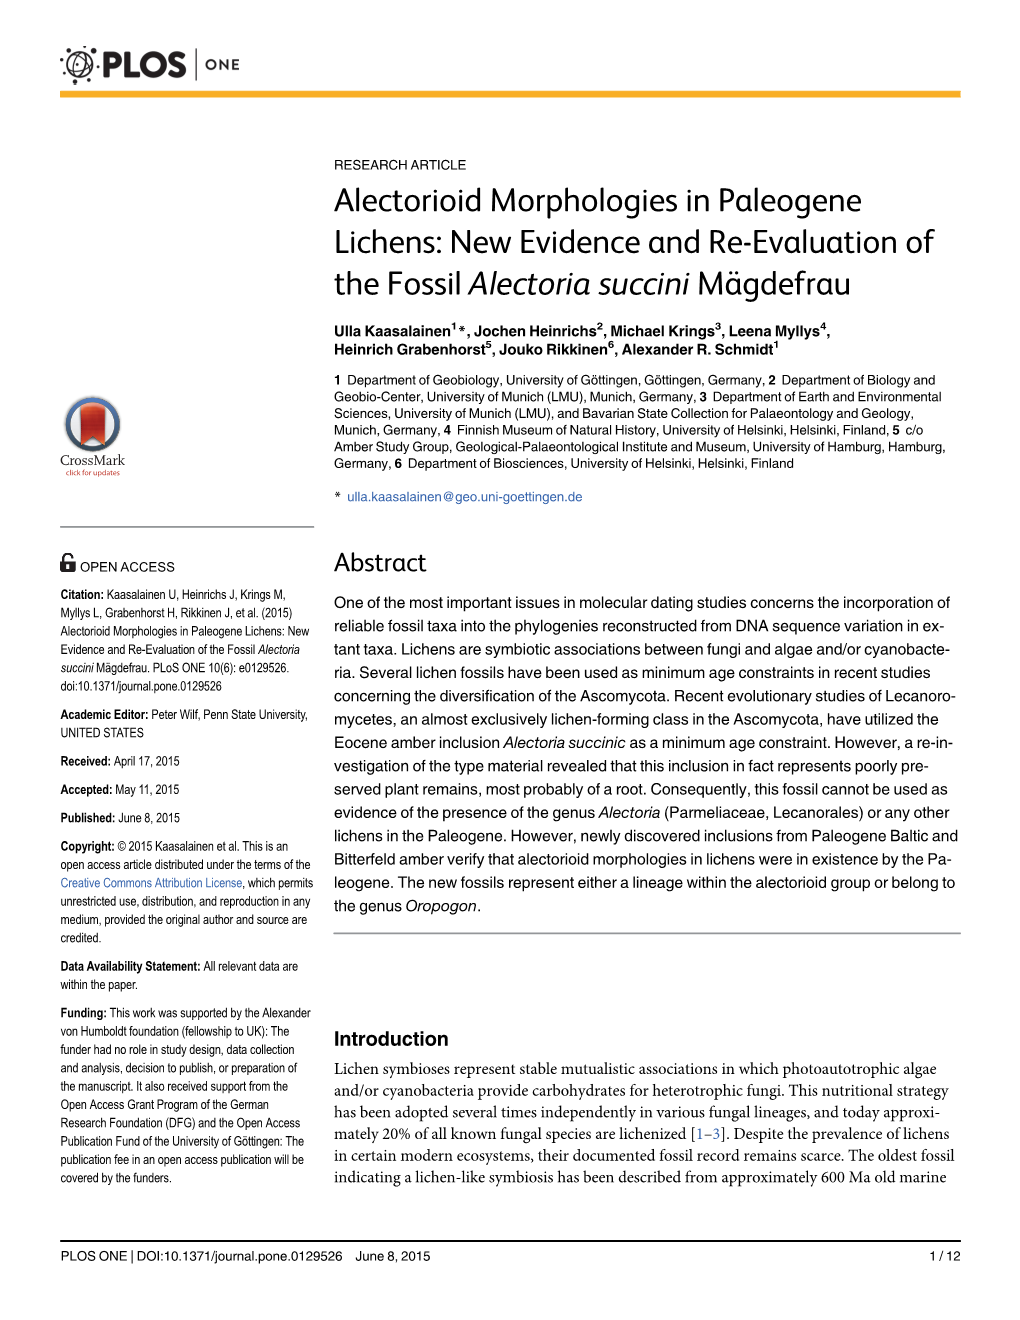 Alectorioid Morphologies in Paleogene Lichens: New Evidence and Re-Evaluation of the Fossil Alectoria Succini Mägdefrau